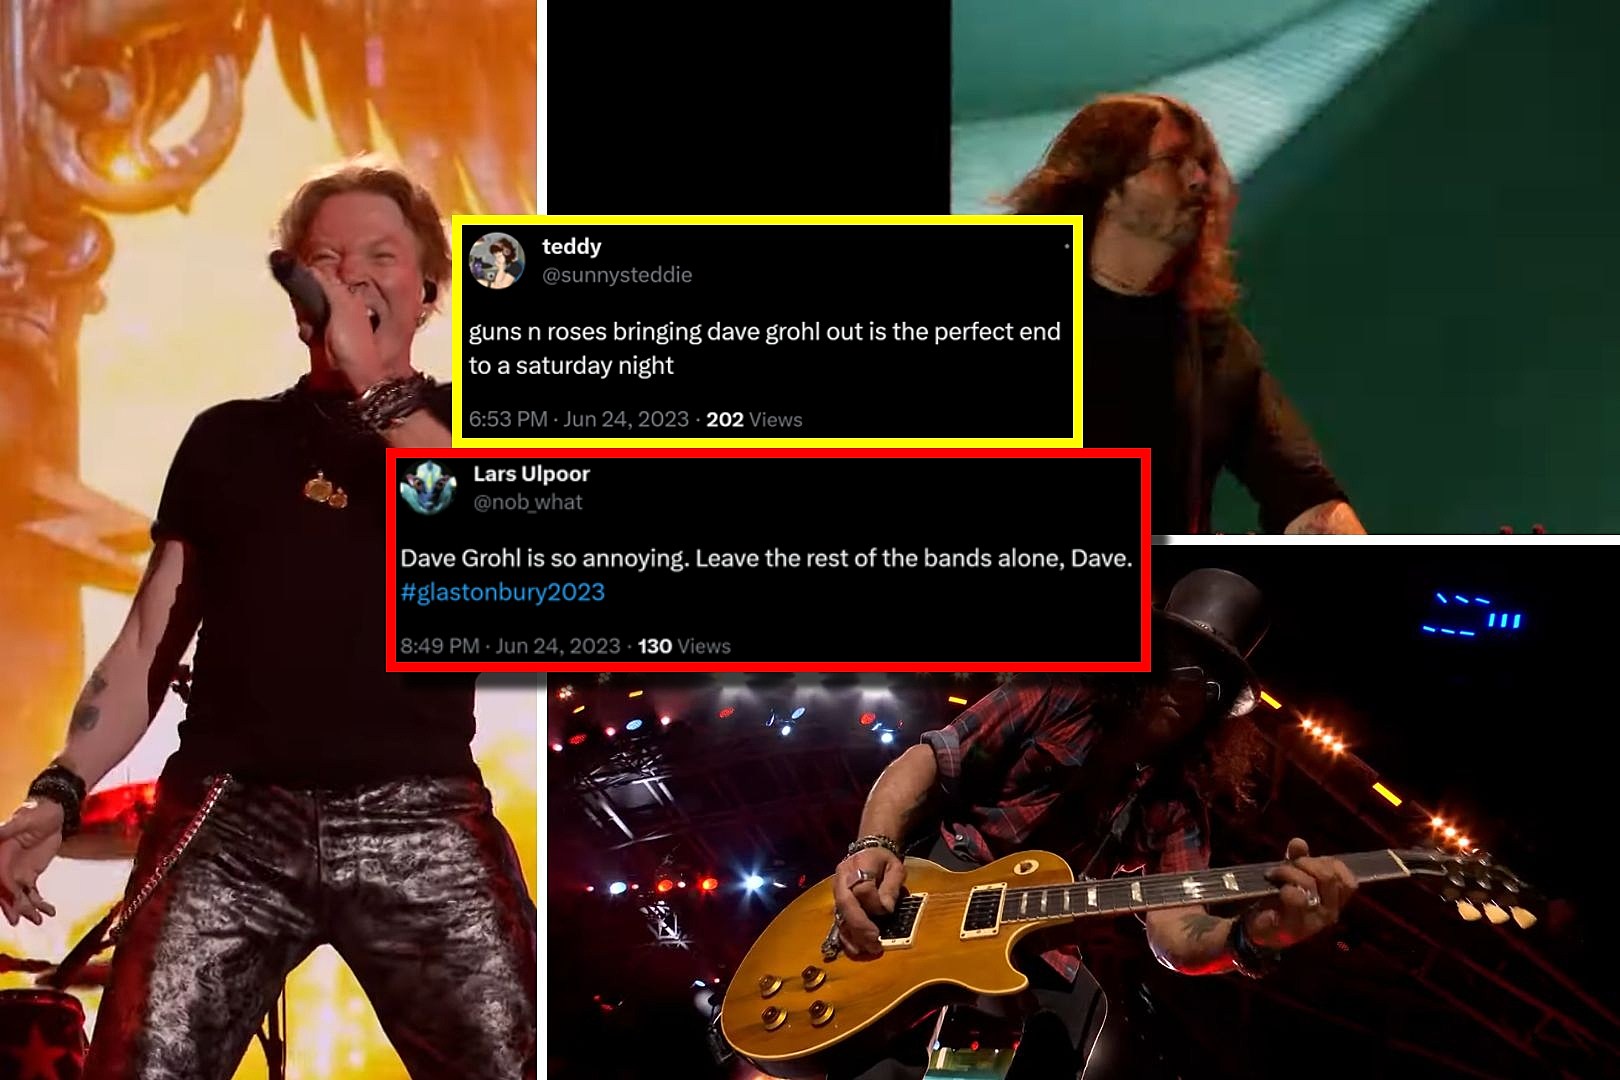 Guns N' Roses + Dave Grohl Glastonbury 2023 + Fan Reactions